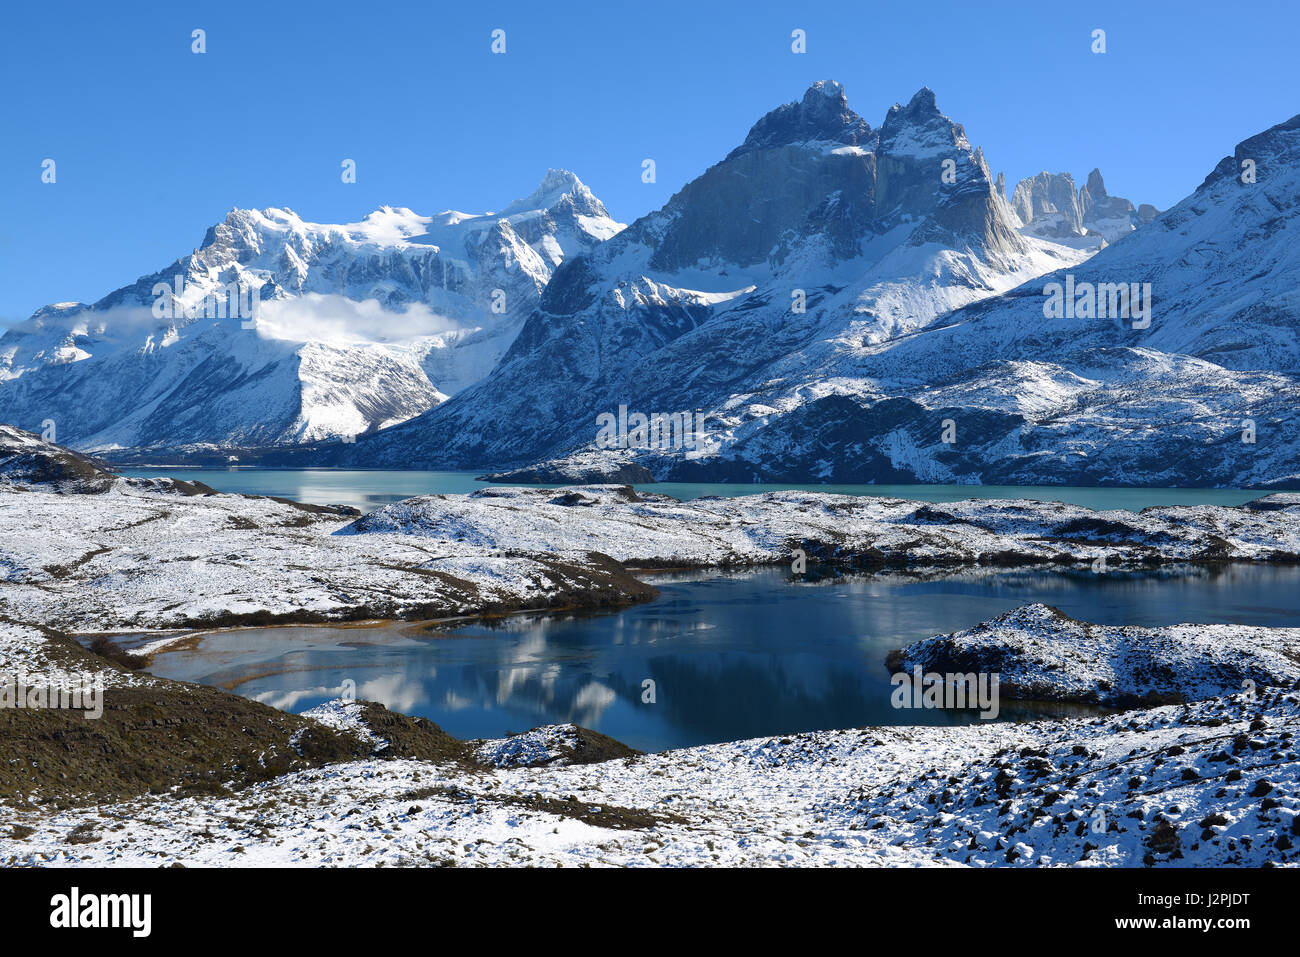 The beautiful Nordenskjold lake in winter located inside the Torres del Paine national park with a view over the Cuernos del Paine, Patagonia, Chile. Stock Photo